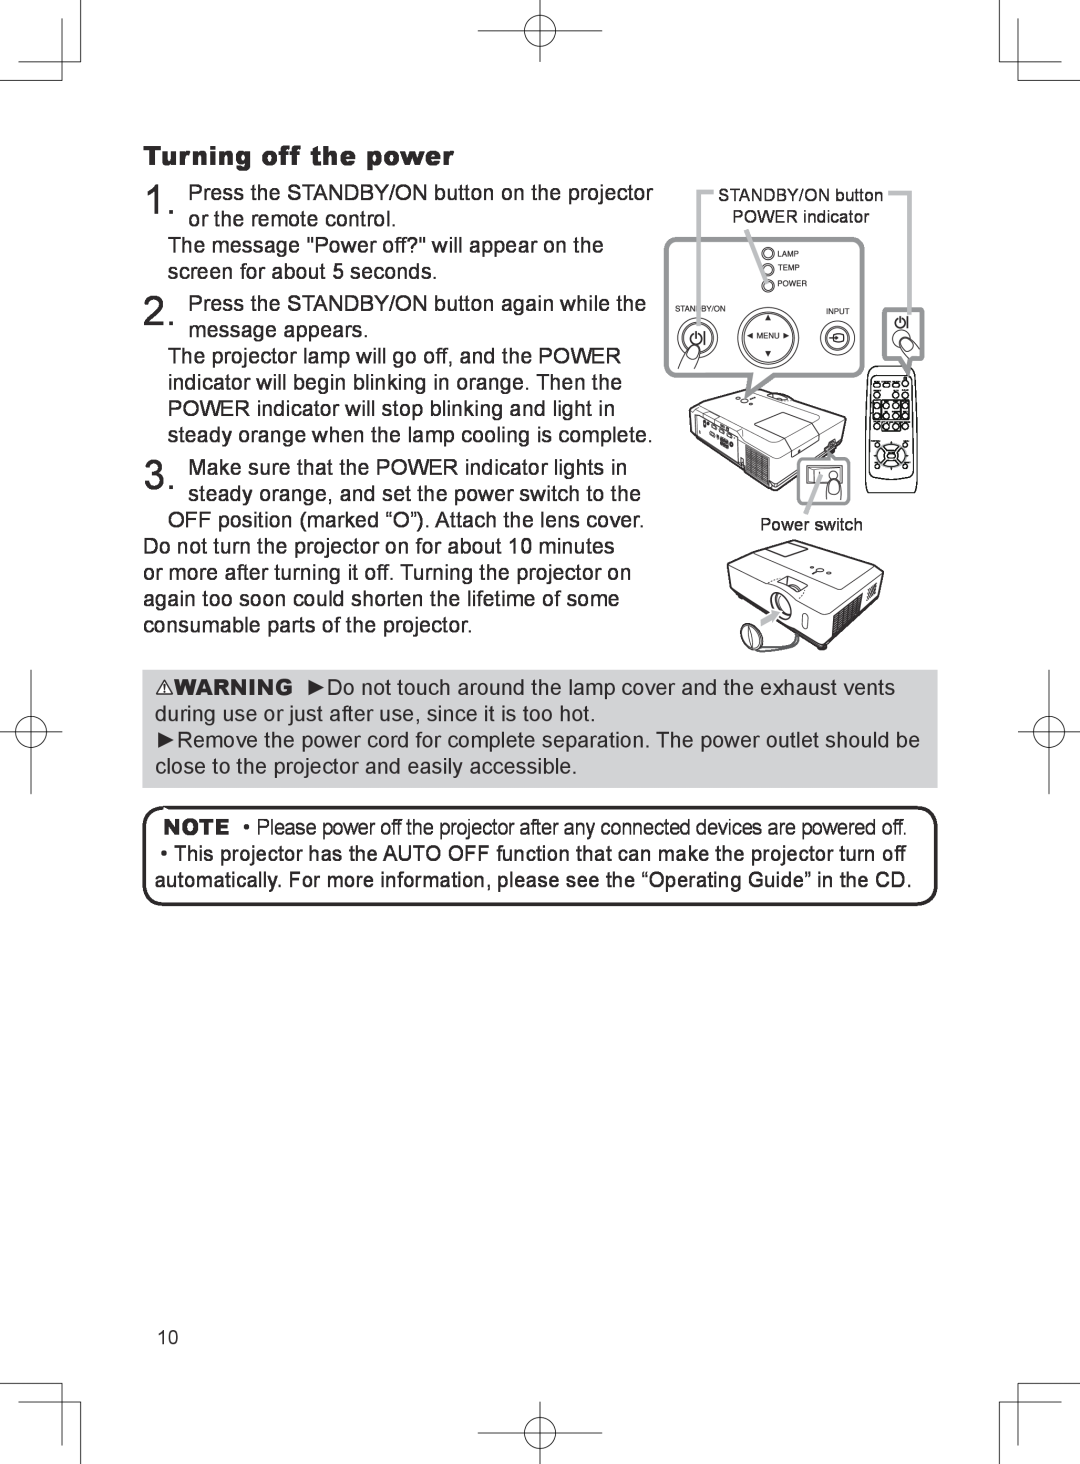 Dukane 8781 user manual Turning off the power 